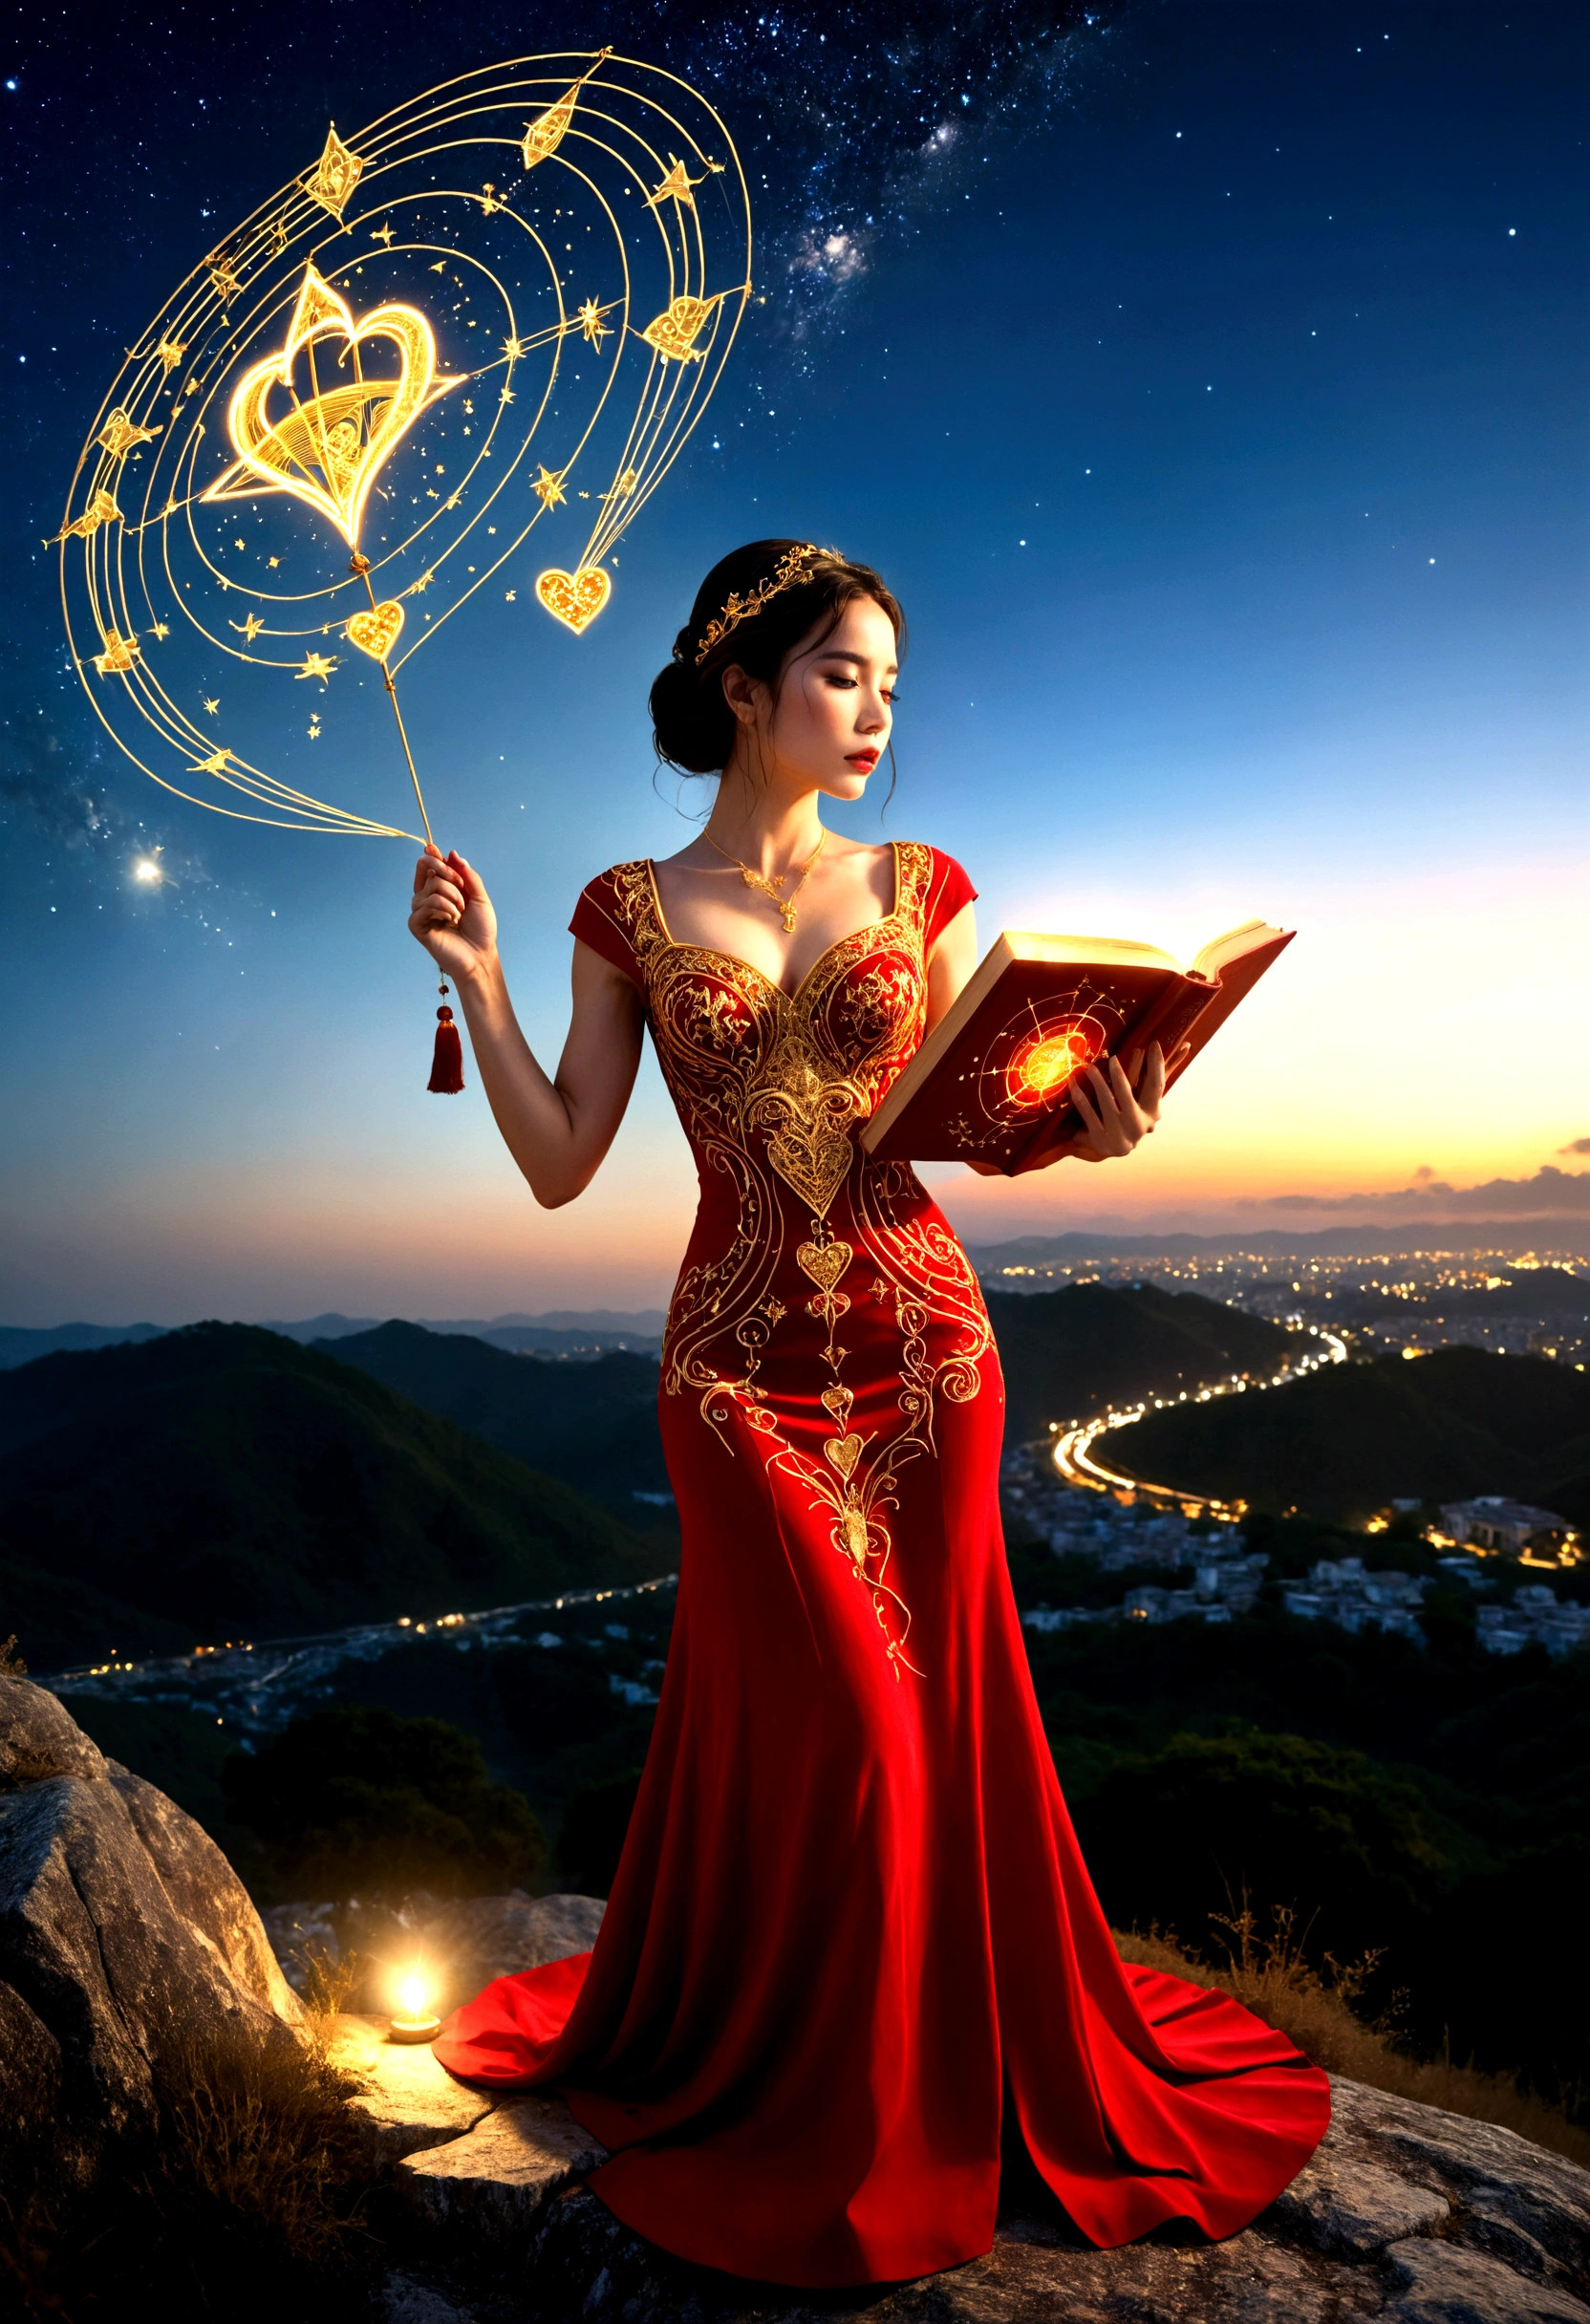 A woman in a love themed red dress with loads of intricate gold love embroidery, carrying a tome, on a hill top, two astrological sign light up brightly in the skies with the connective lines, night
